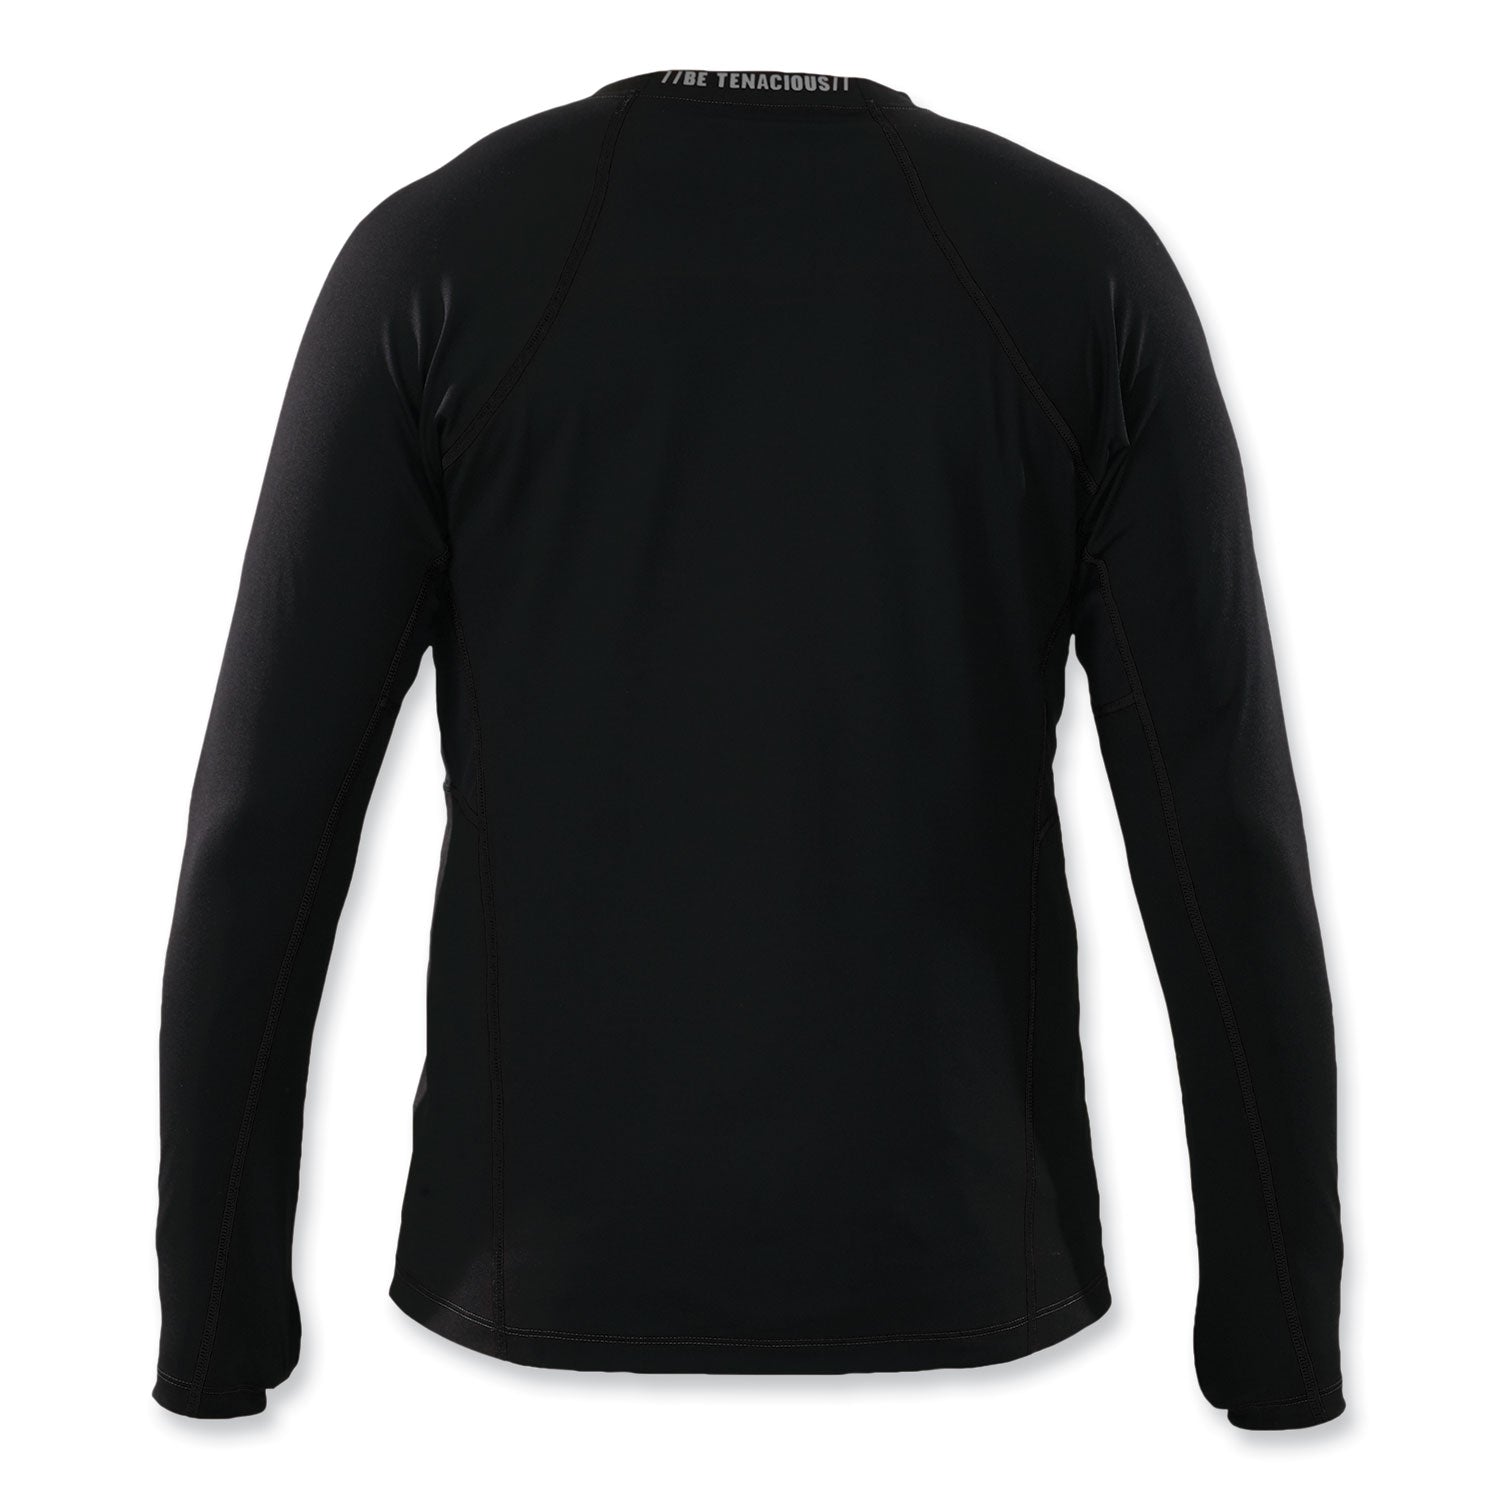 n-ferno-6435-midweight-long-sleeve-base-layer-shirt-2x-large-black-ships-in-1-3-business-days_ego40206 - 2